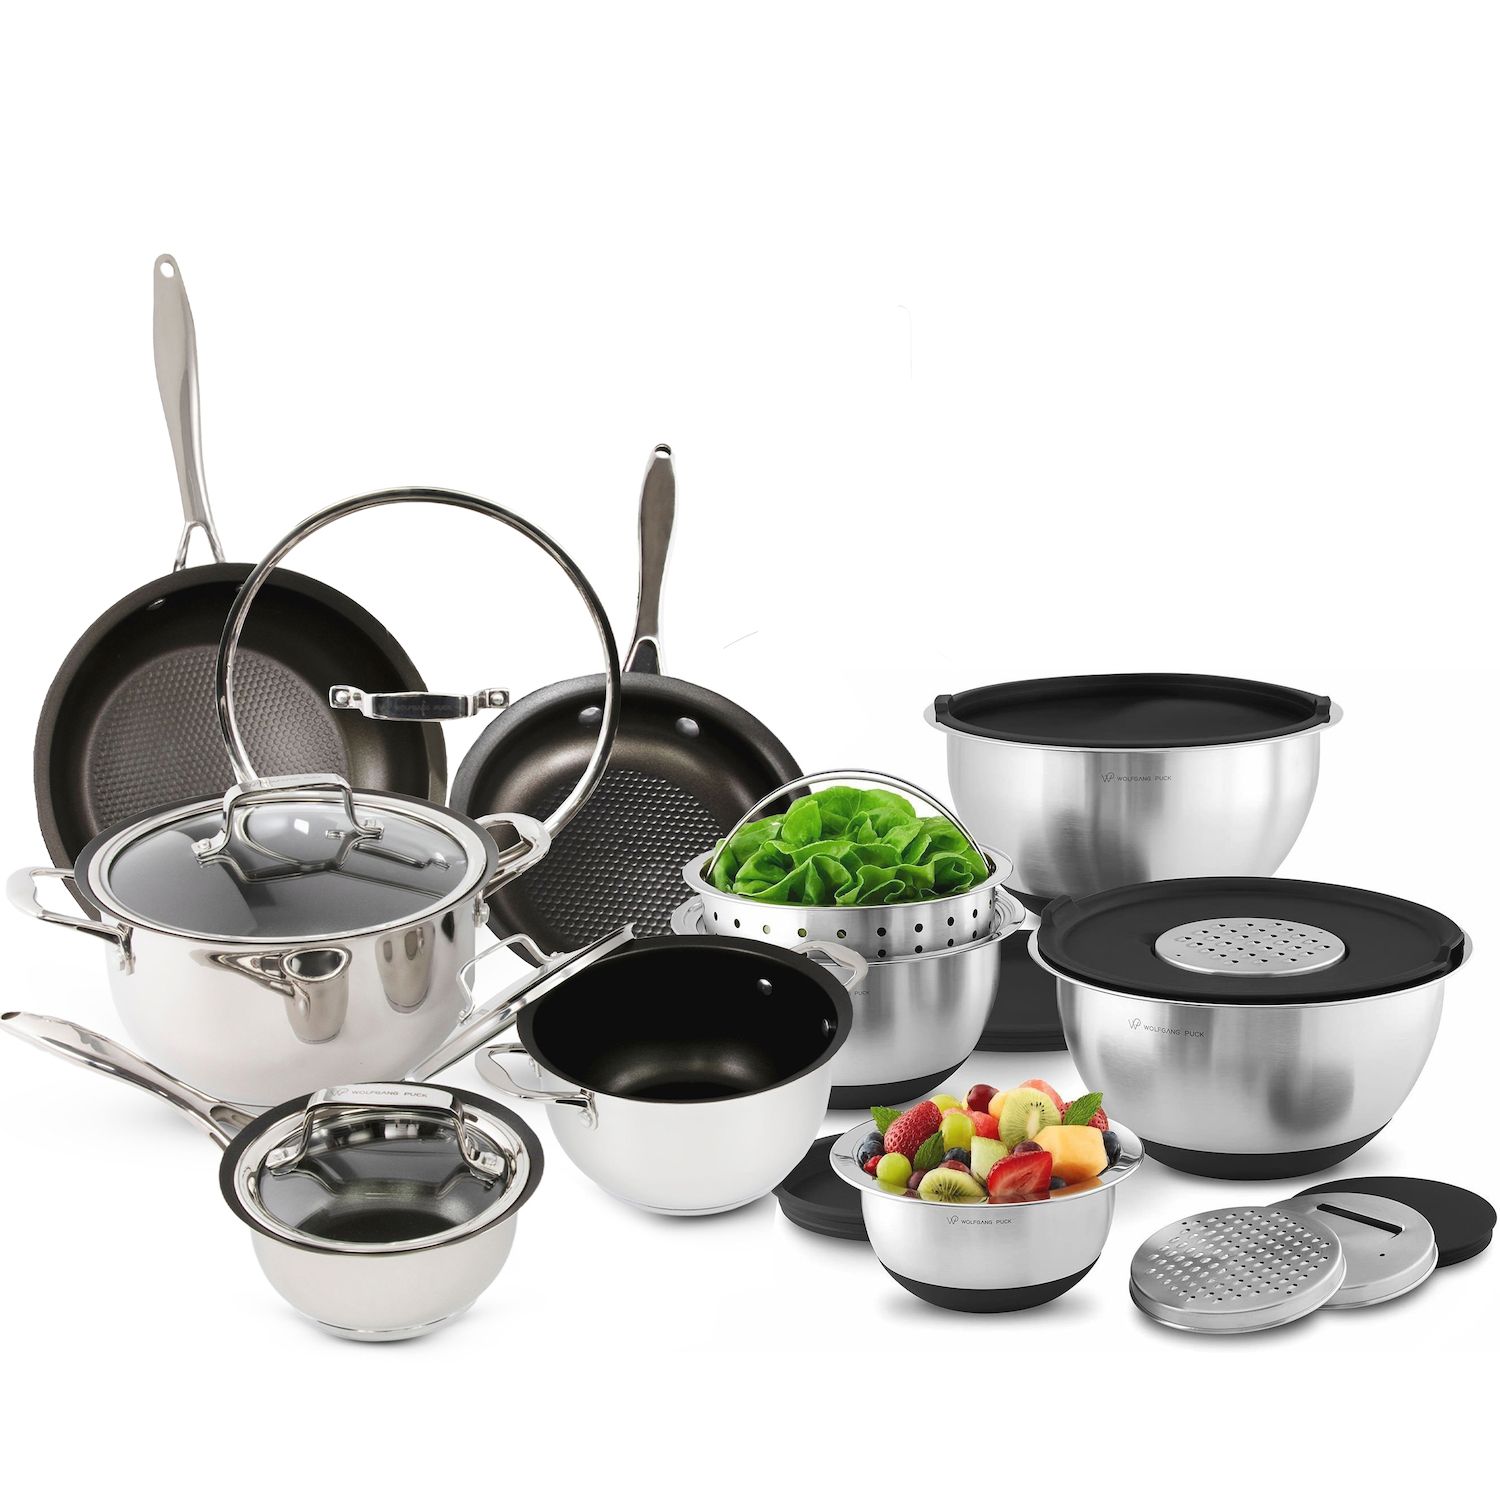 Camco Stainless Steel Nesting Cookware Set- Non Stick Pans and